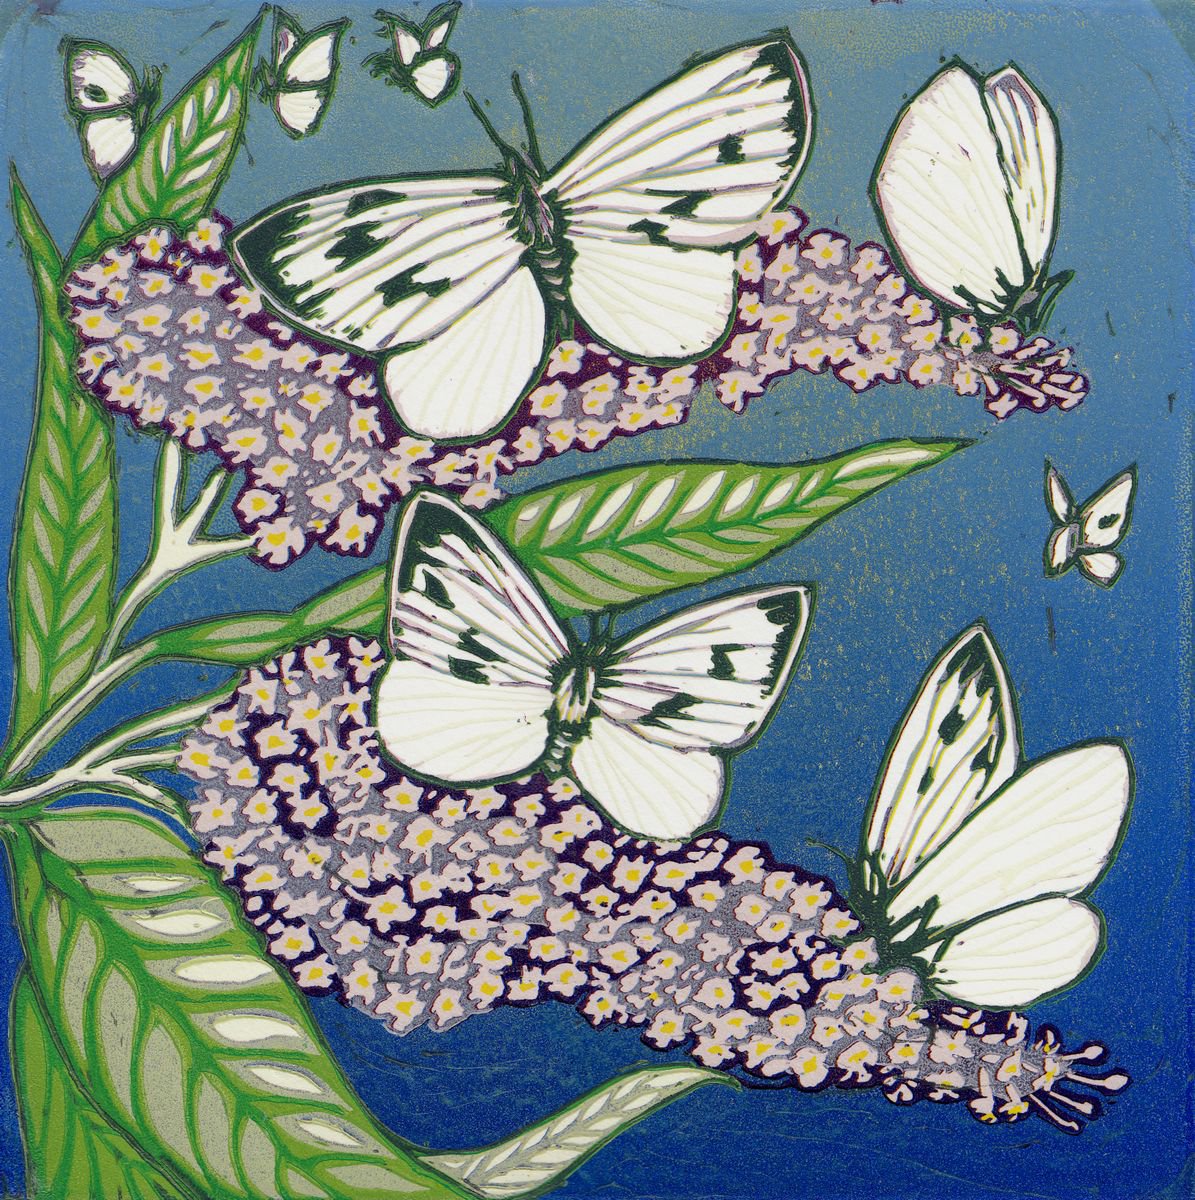 Large Whites by Marian Carter